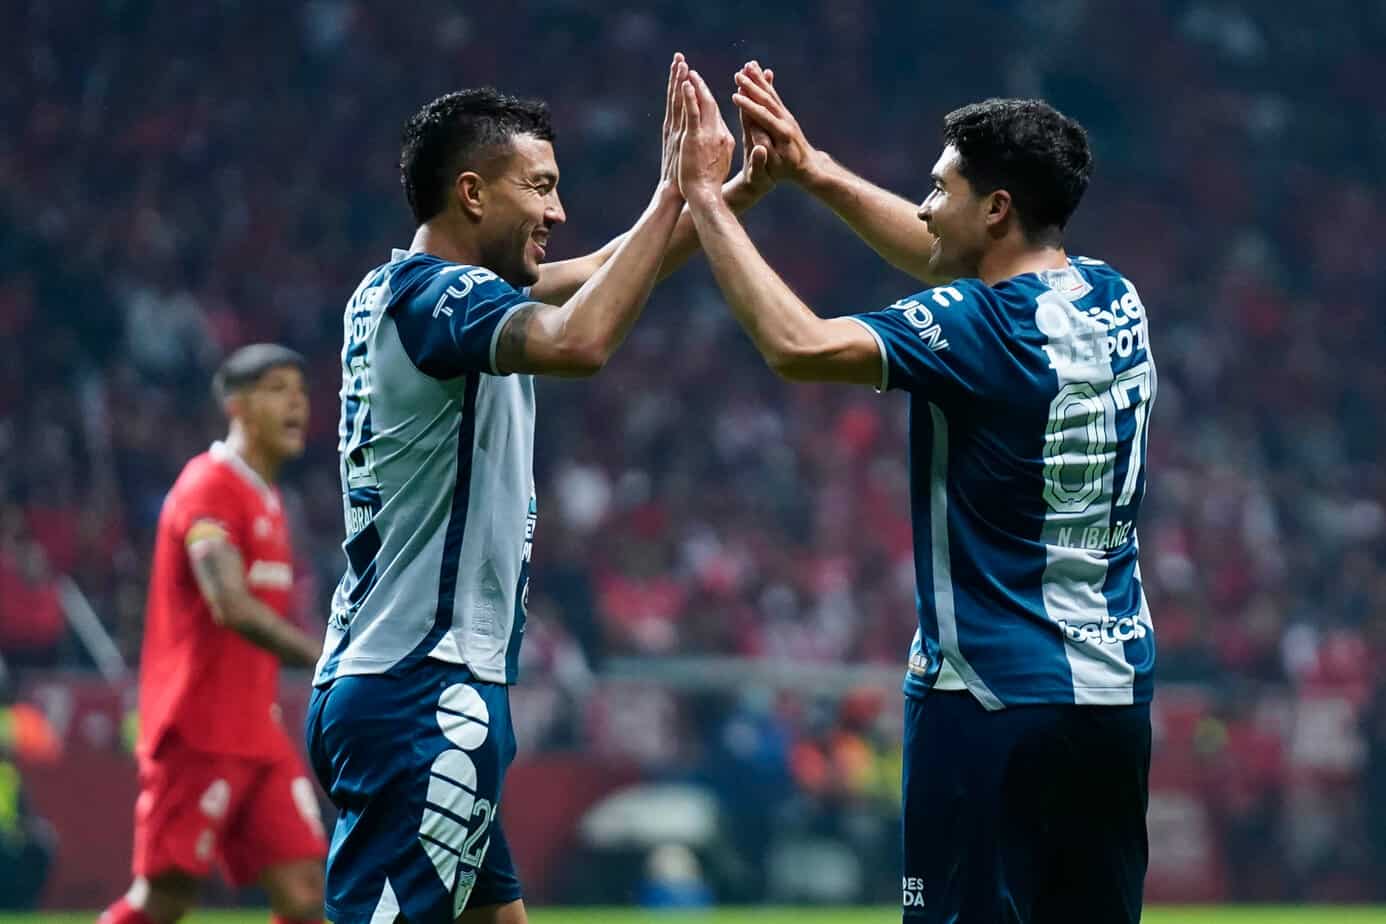 Pachuca vs. Toluca Preview and Free Pick